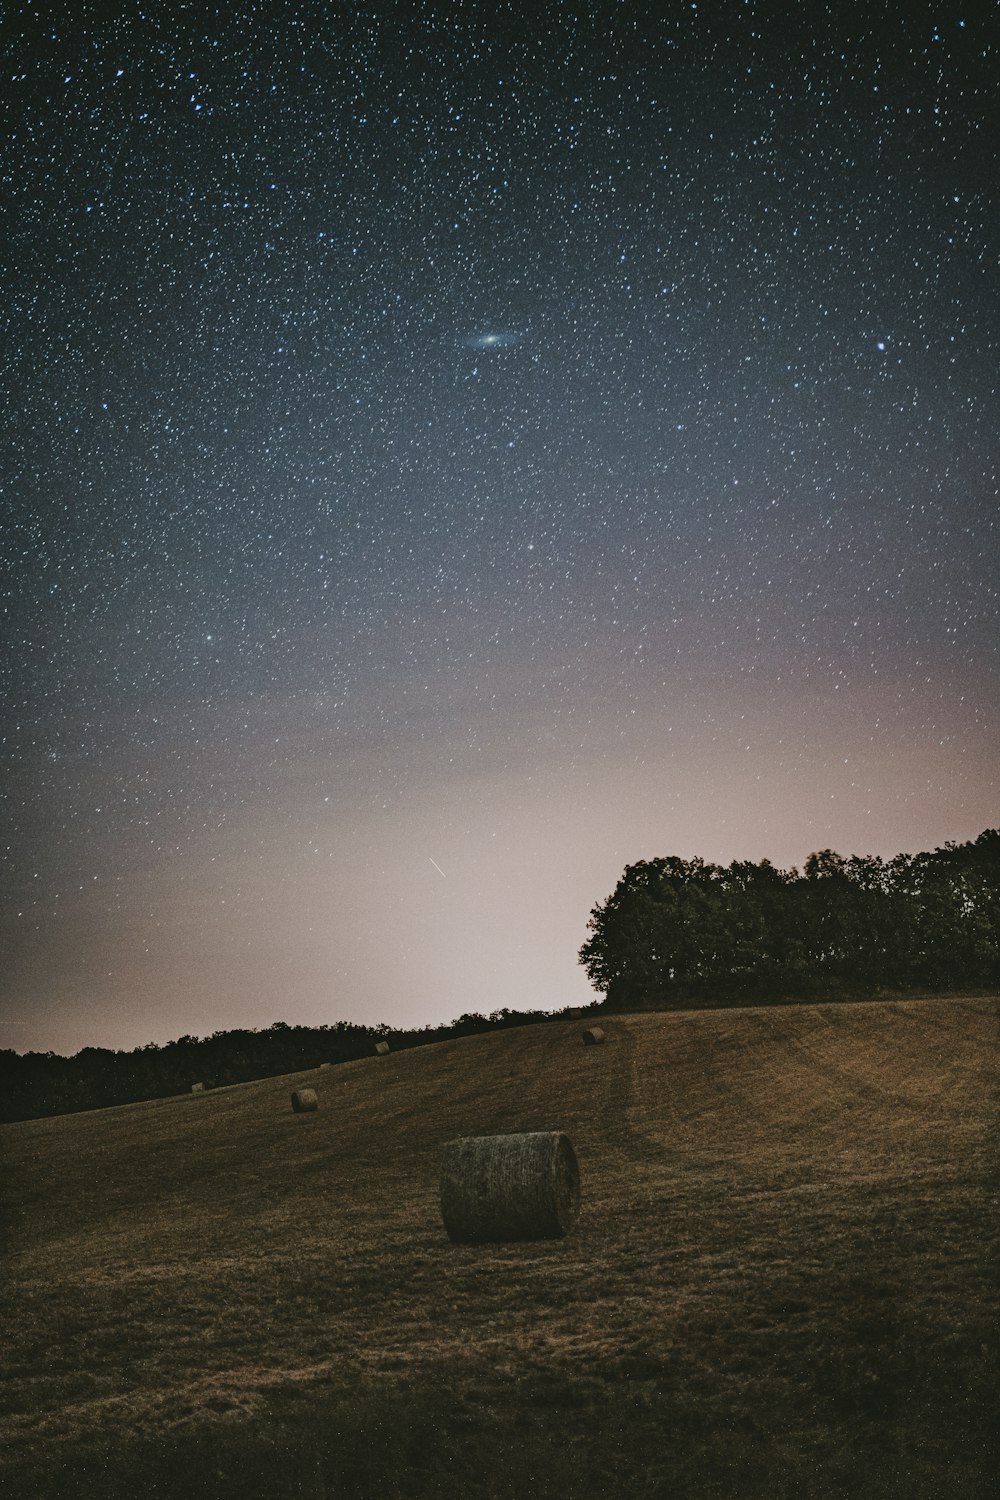 a field with hay bales under a night sky